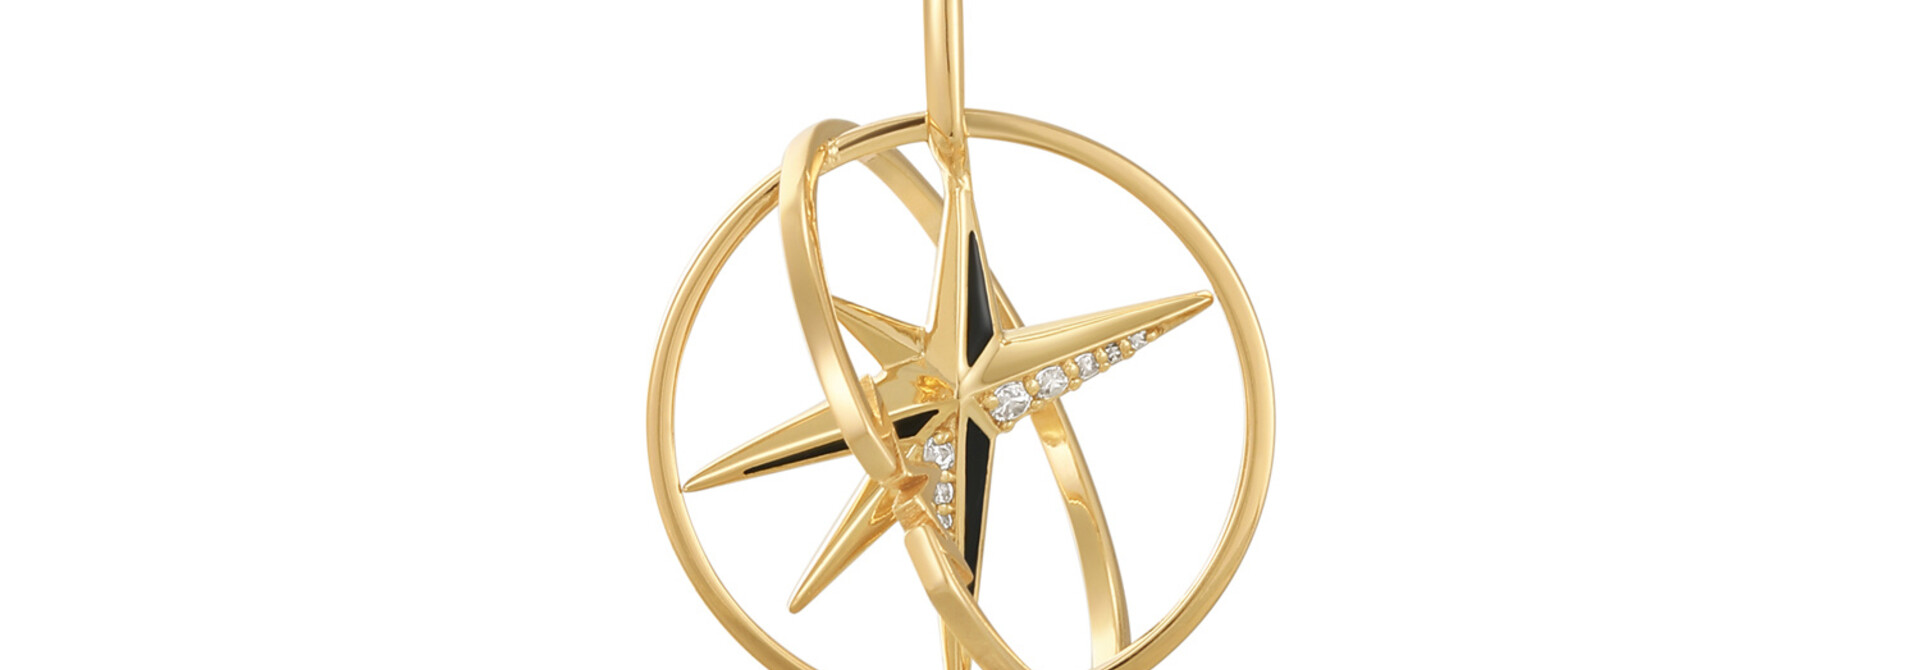 Star Circle Bedel - Gold plated